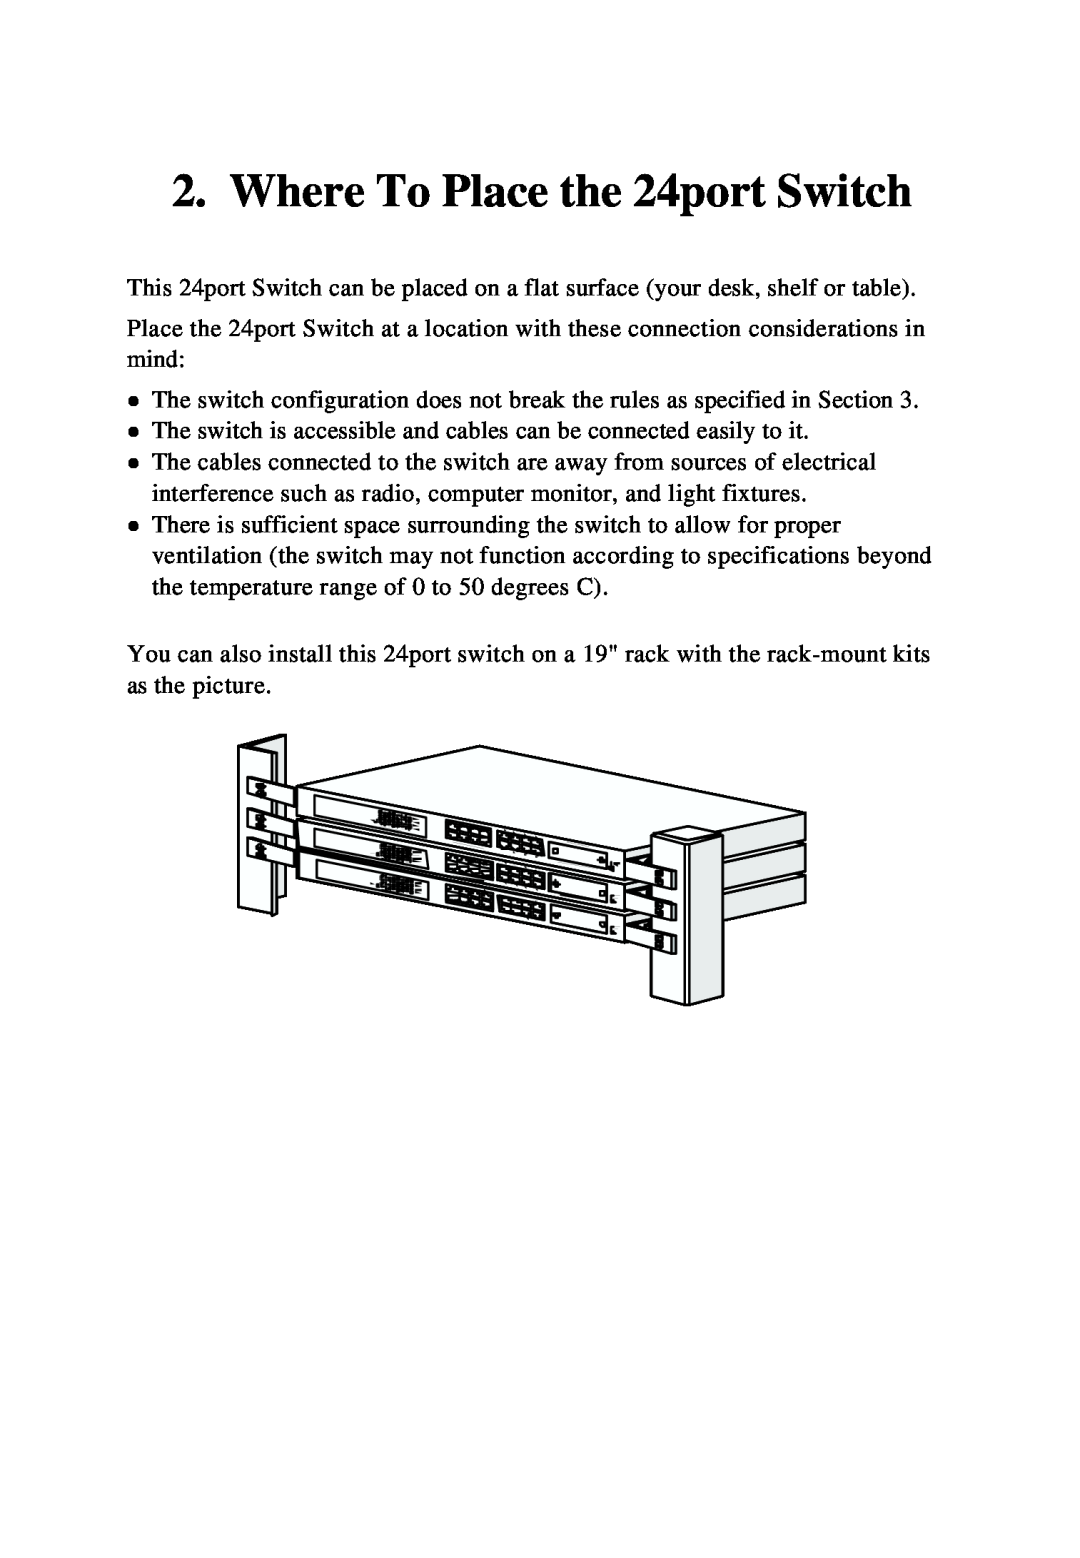 KTI Networks KS-324F manual Where To Place the 24port Switch 